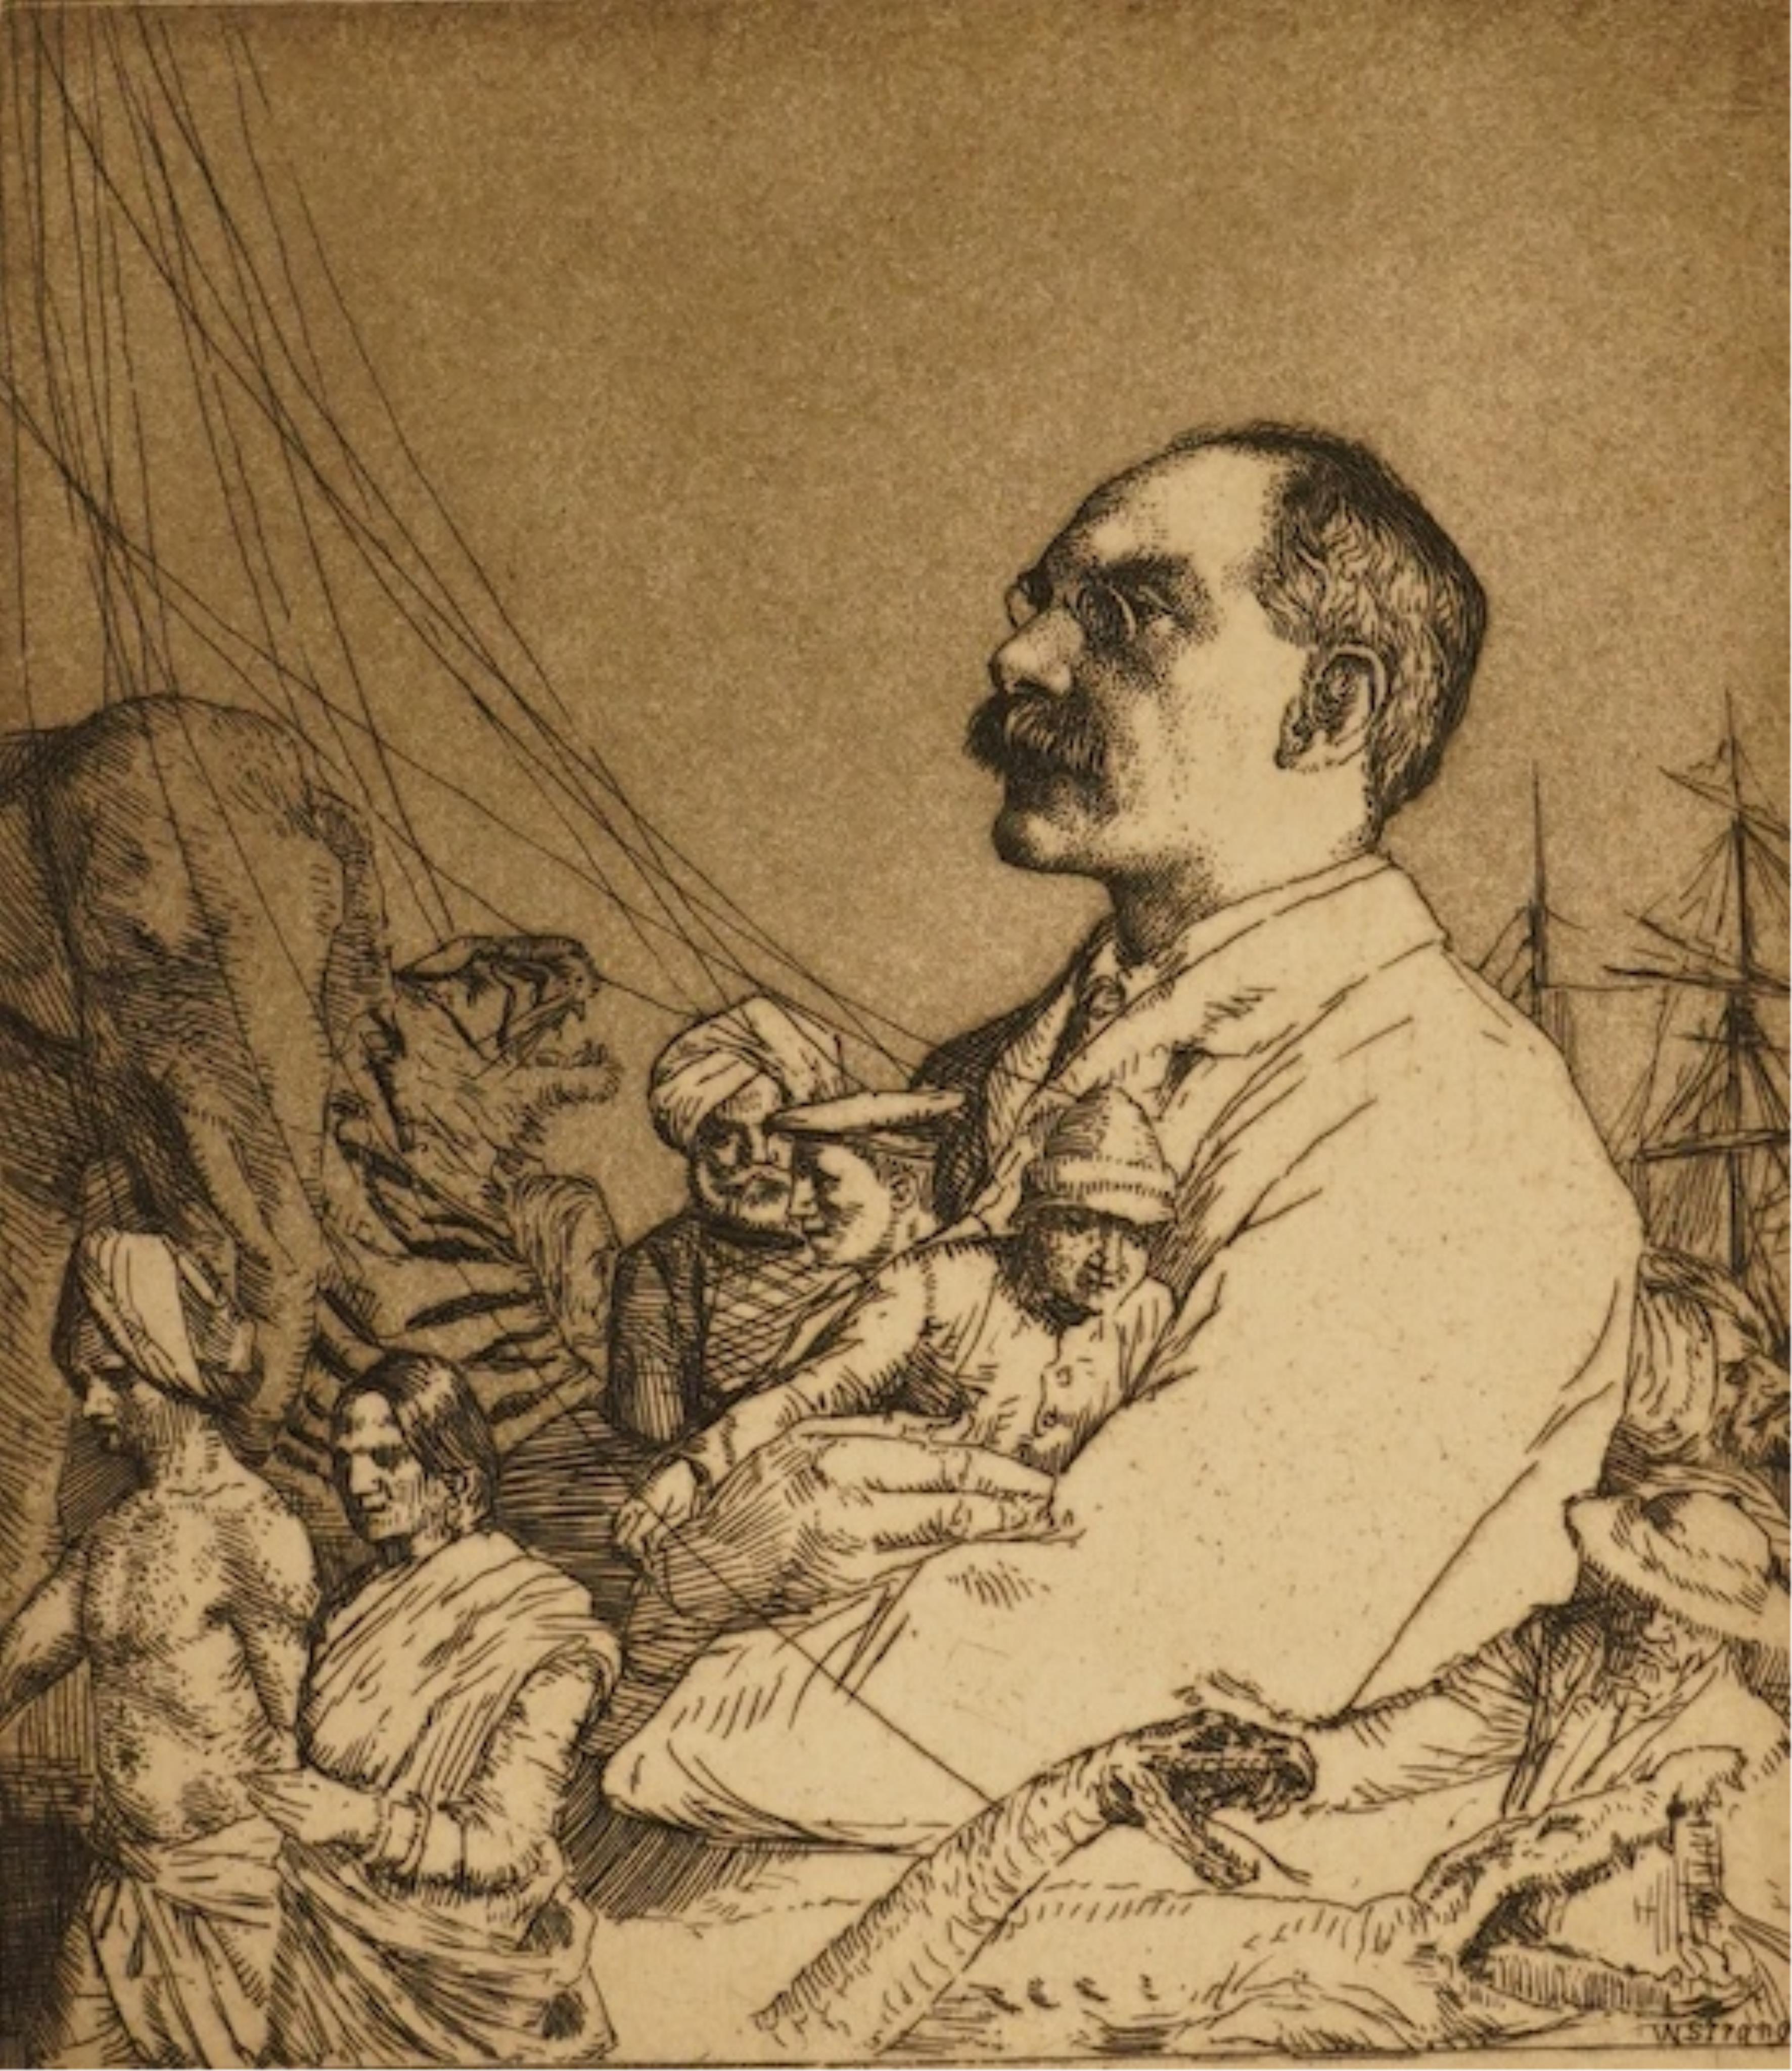 [Kipling, Rudyard], Strang William, A Series of Thirty Etchings, Illustrating Subjects from the Writings of Rudyard Kipling, Macmillan, 1901, 44 x 35cm. Condition - fair with foxing and staining